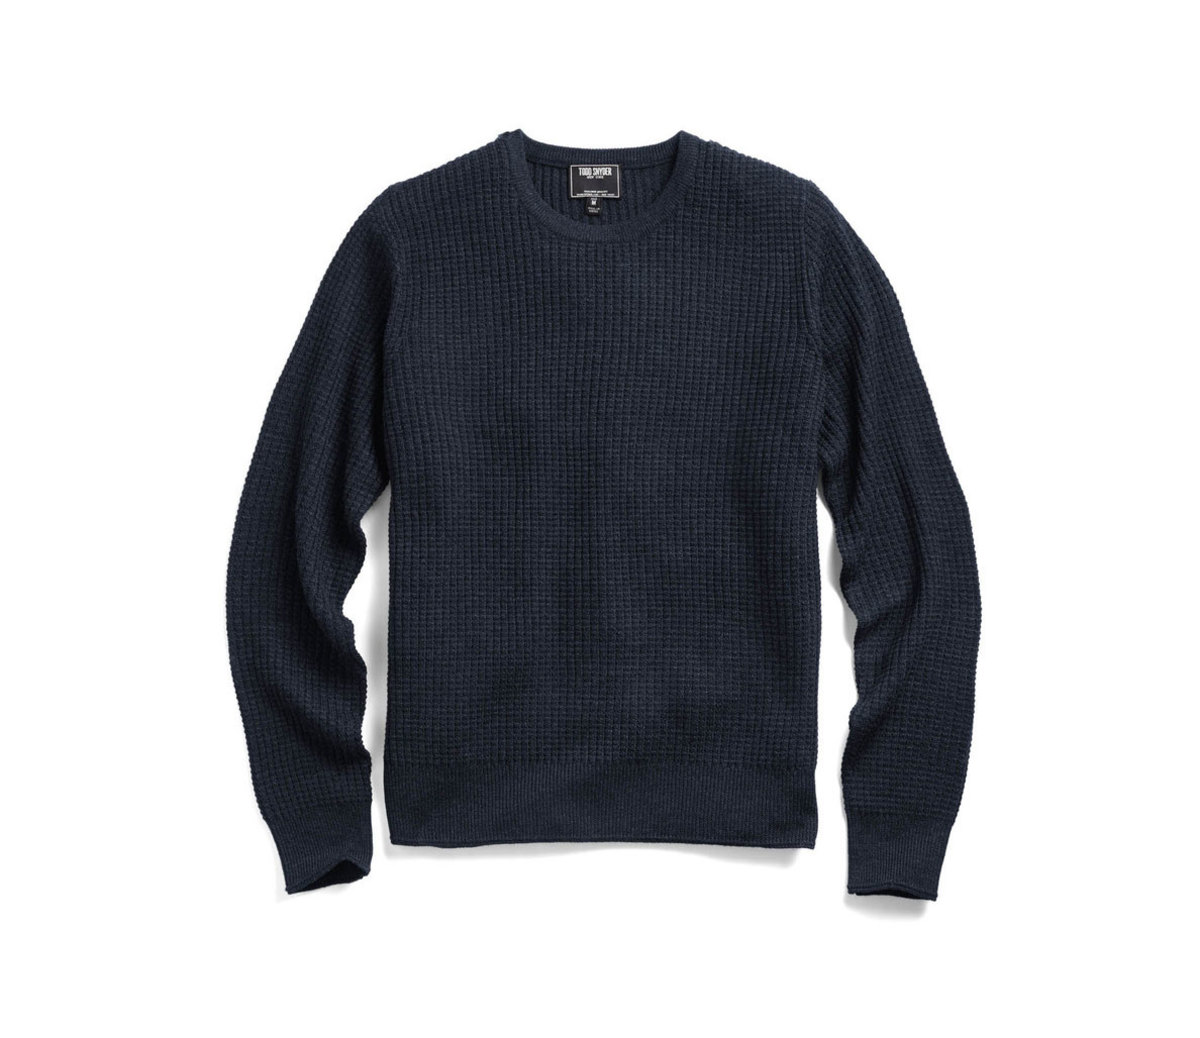 15 Lightweight Sweaters For Men in Multiple Colors and Price Points ...